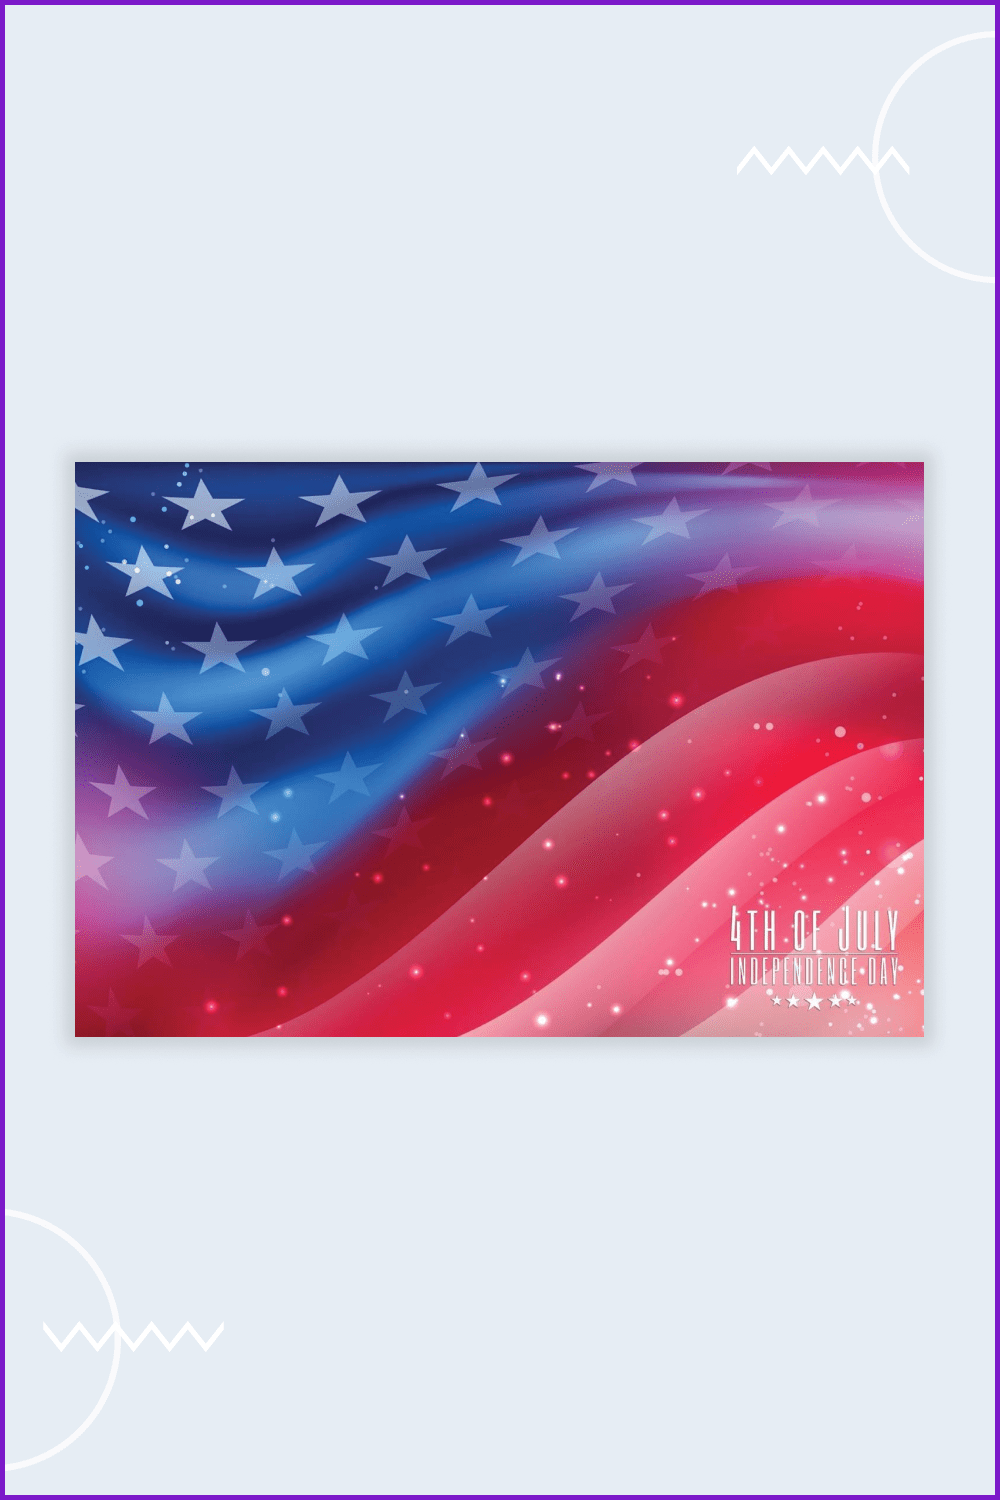 60+ Best American Flag Vectors 2022 for High Quality & Patriotic Projects